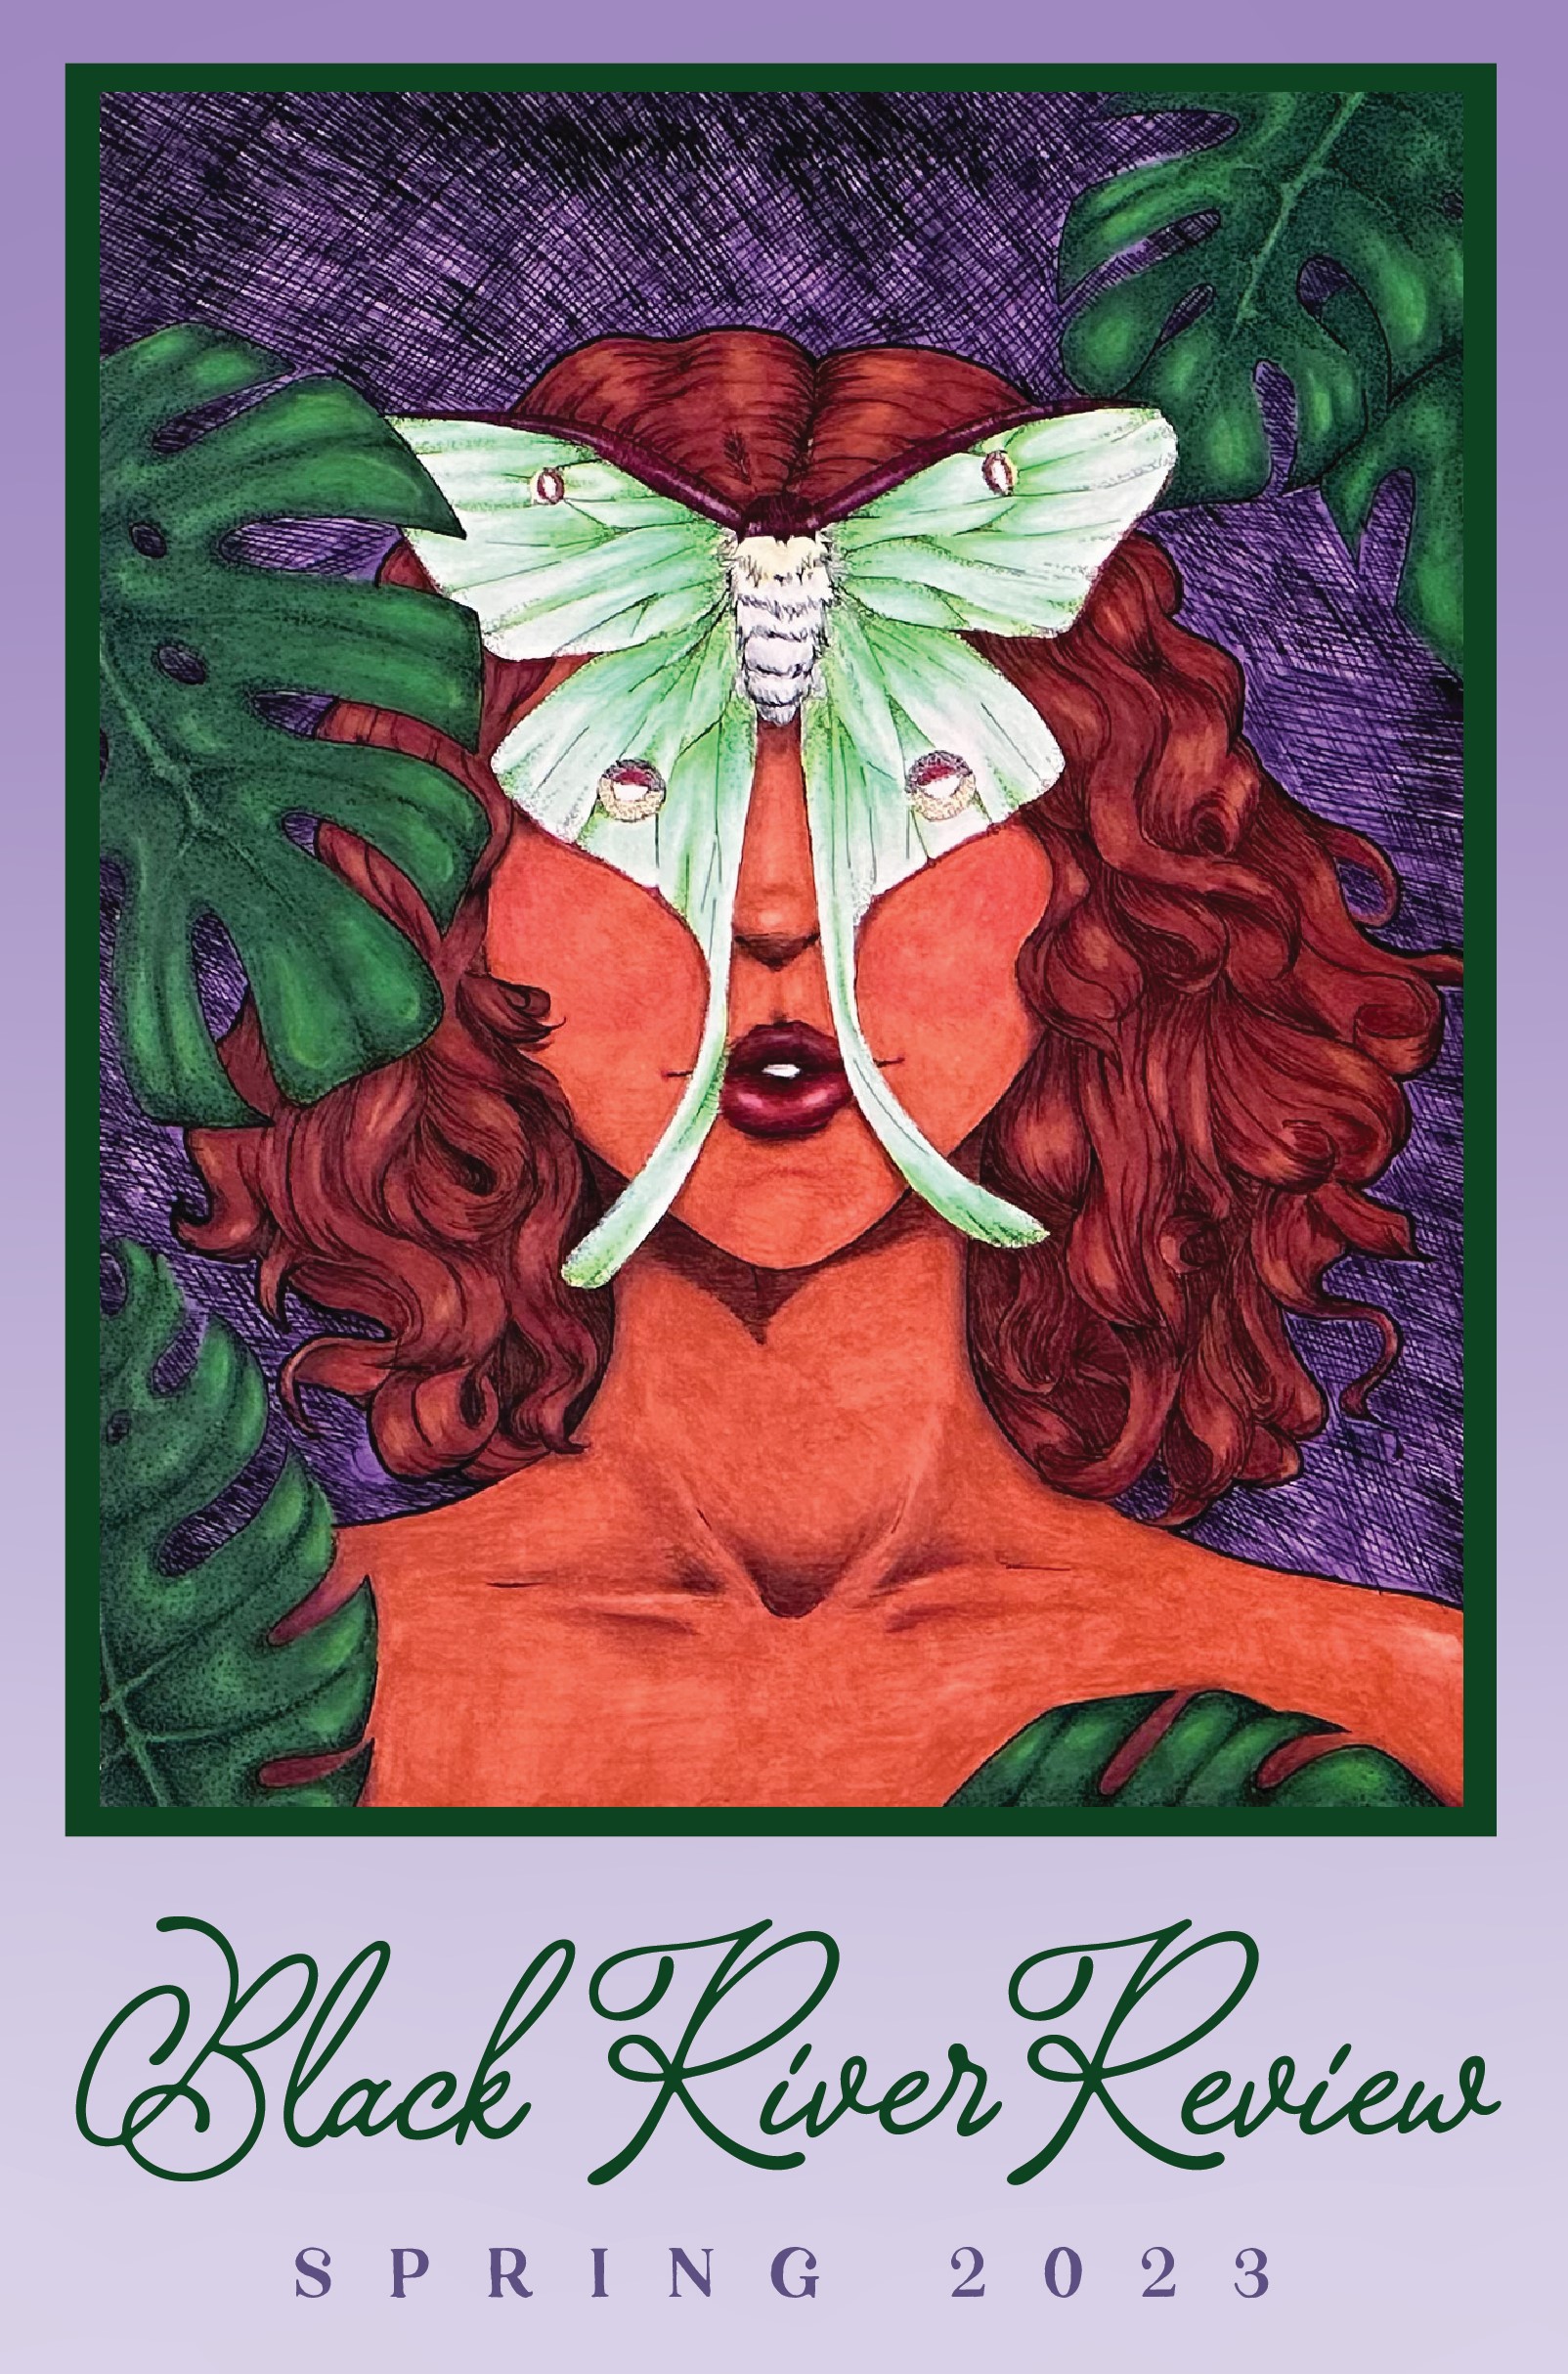 "Hidden Truth" by Jess Okai is a light brown-skinned female from collarbone up red auburn hair with large luna moth covering both eyes and philodendron monstera leaves along inner edge of frame